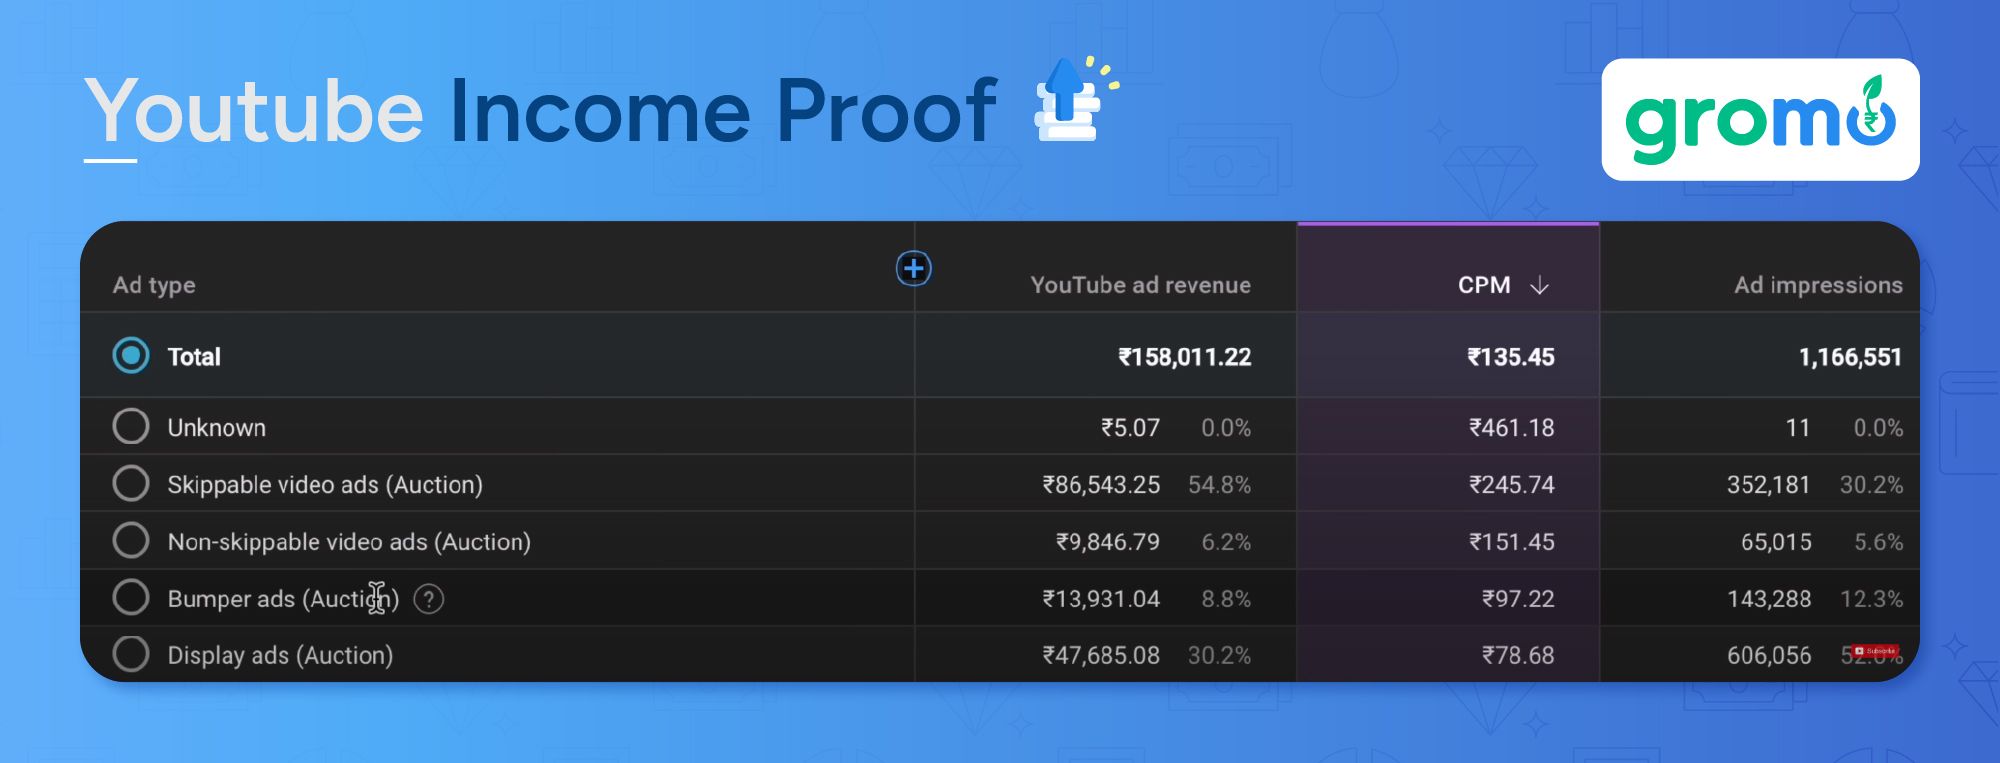 YouTube Income Proof - Best Ways to Make Money Online - GroMo